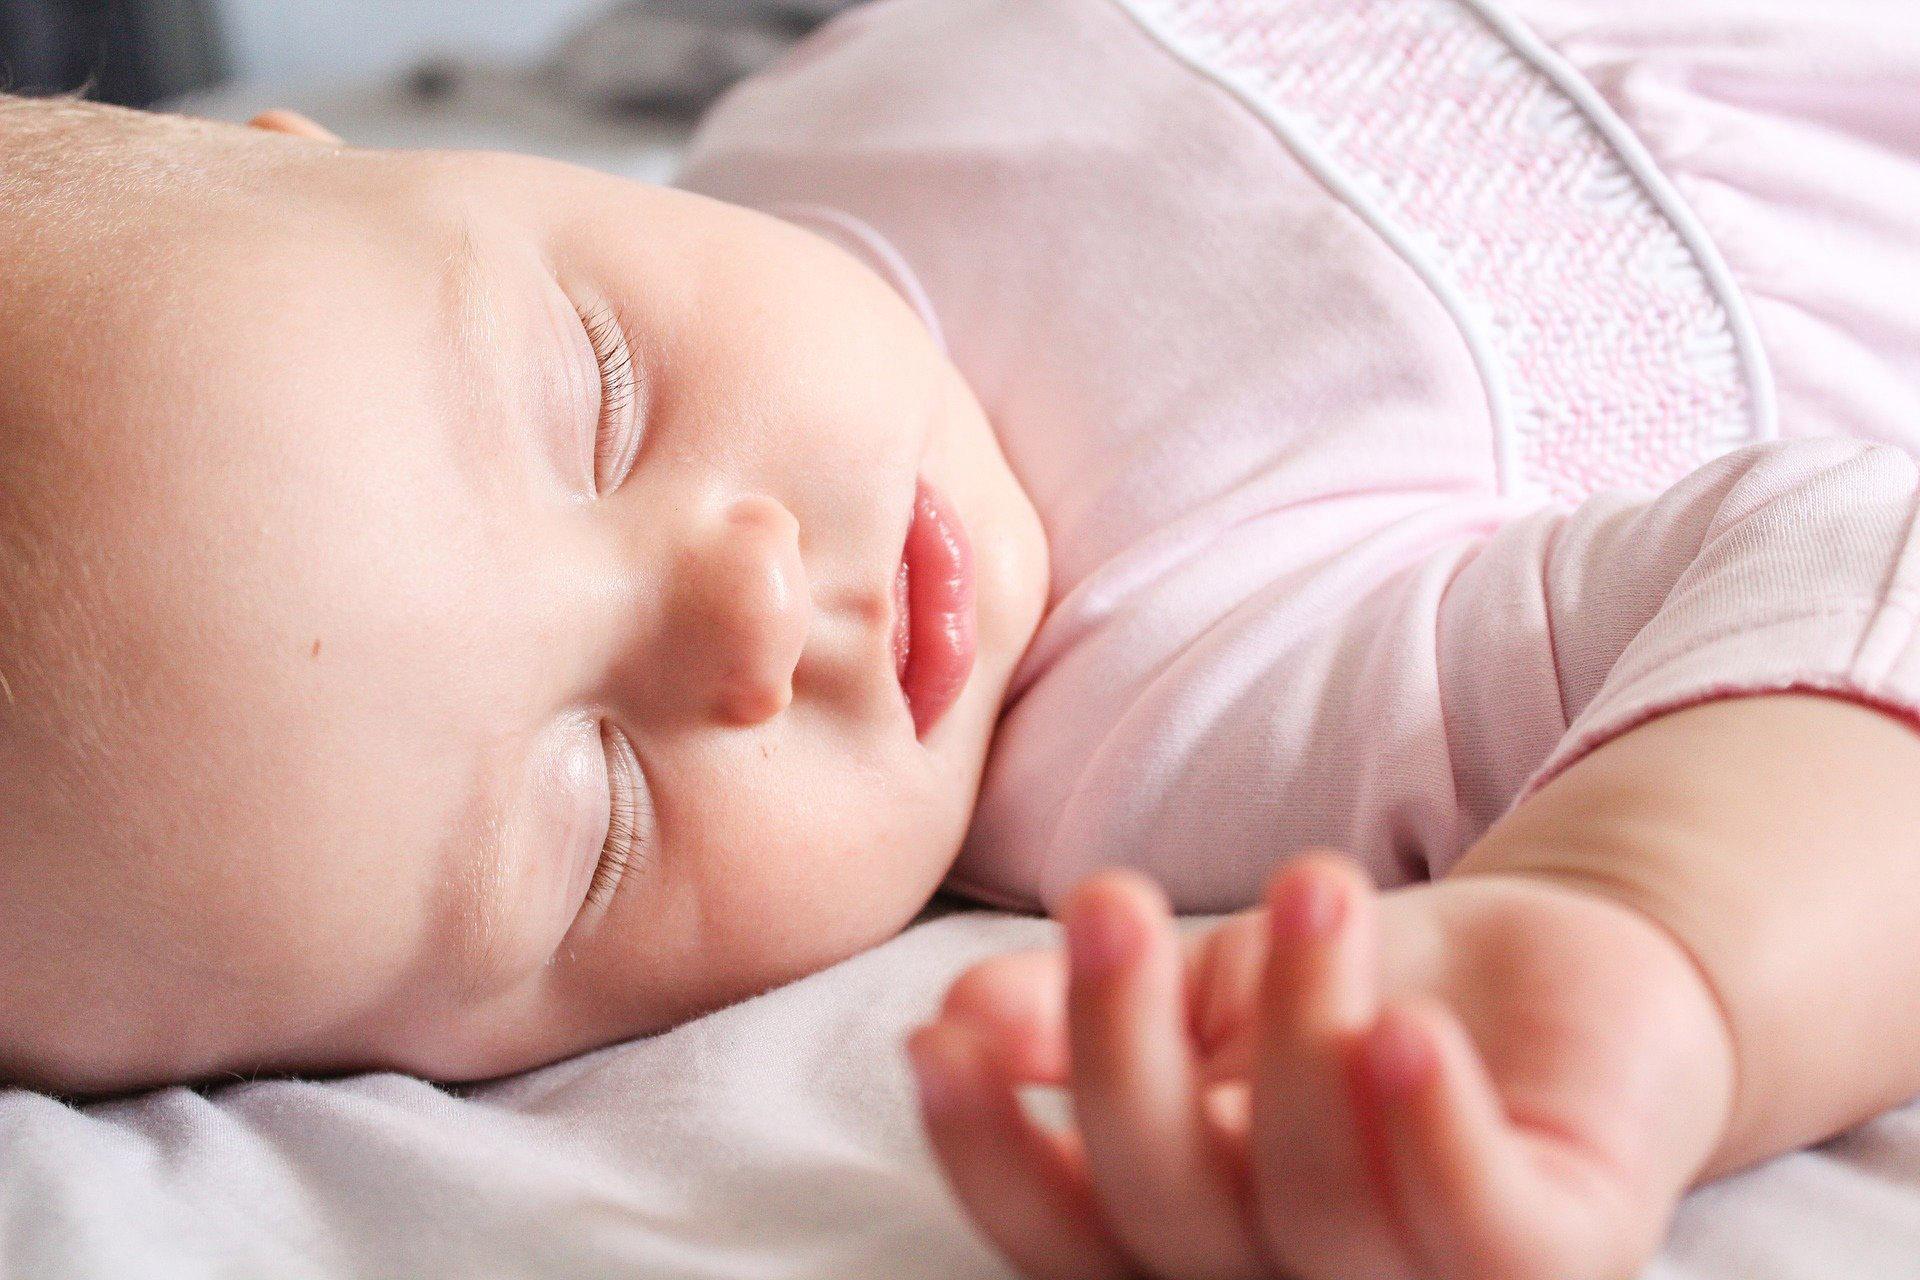 Babies should always be placed on their backs to sleep, according to the U.S. Consumer Product Safety Commission. (amyelizabethquinn / Pixabay)